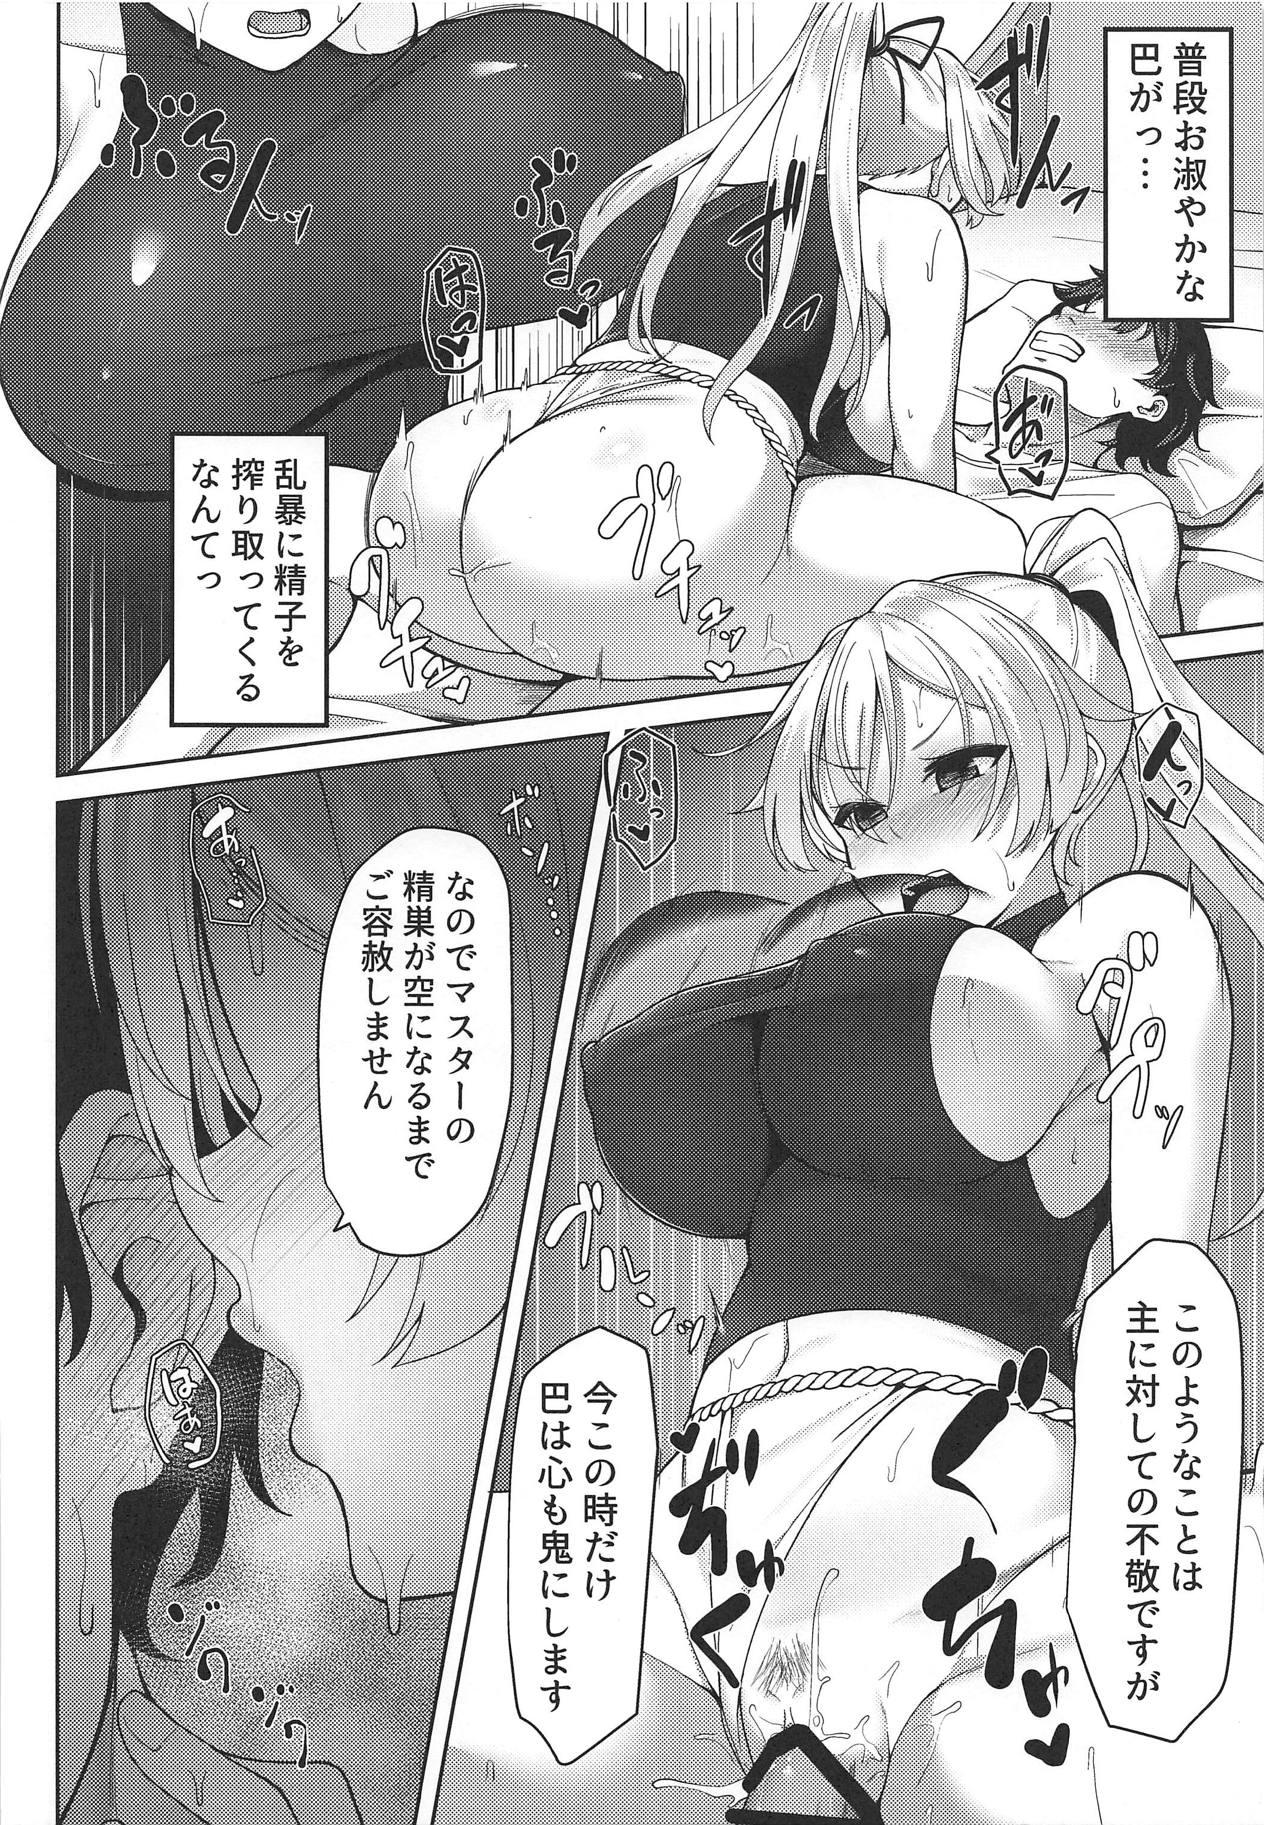 Hard ☆☆☆☆☆☆☆☆Sand - Fate grand order Pussyeating - Page 9